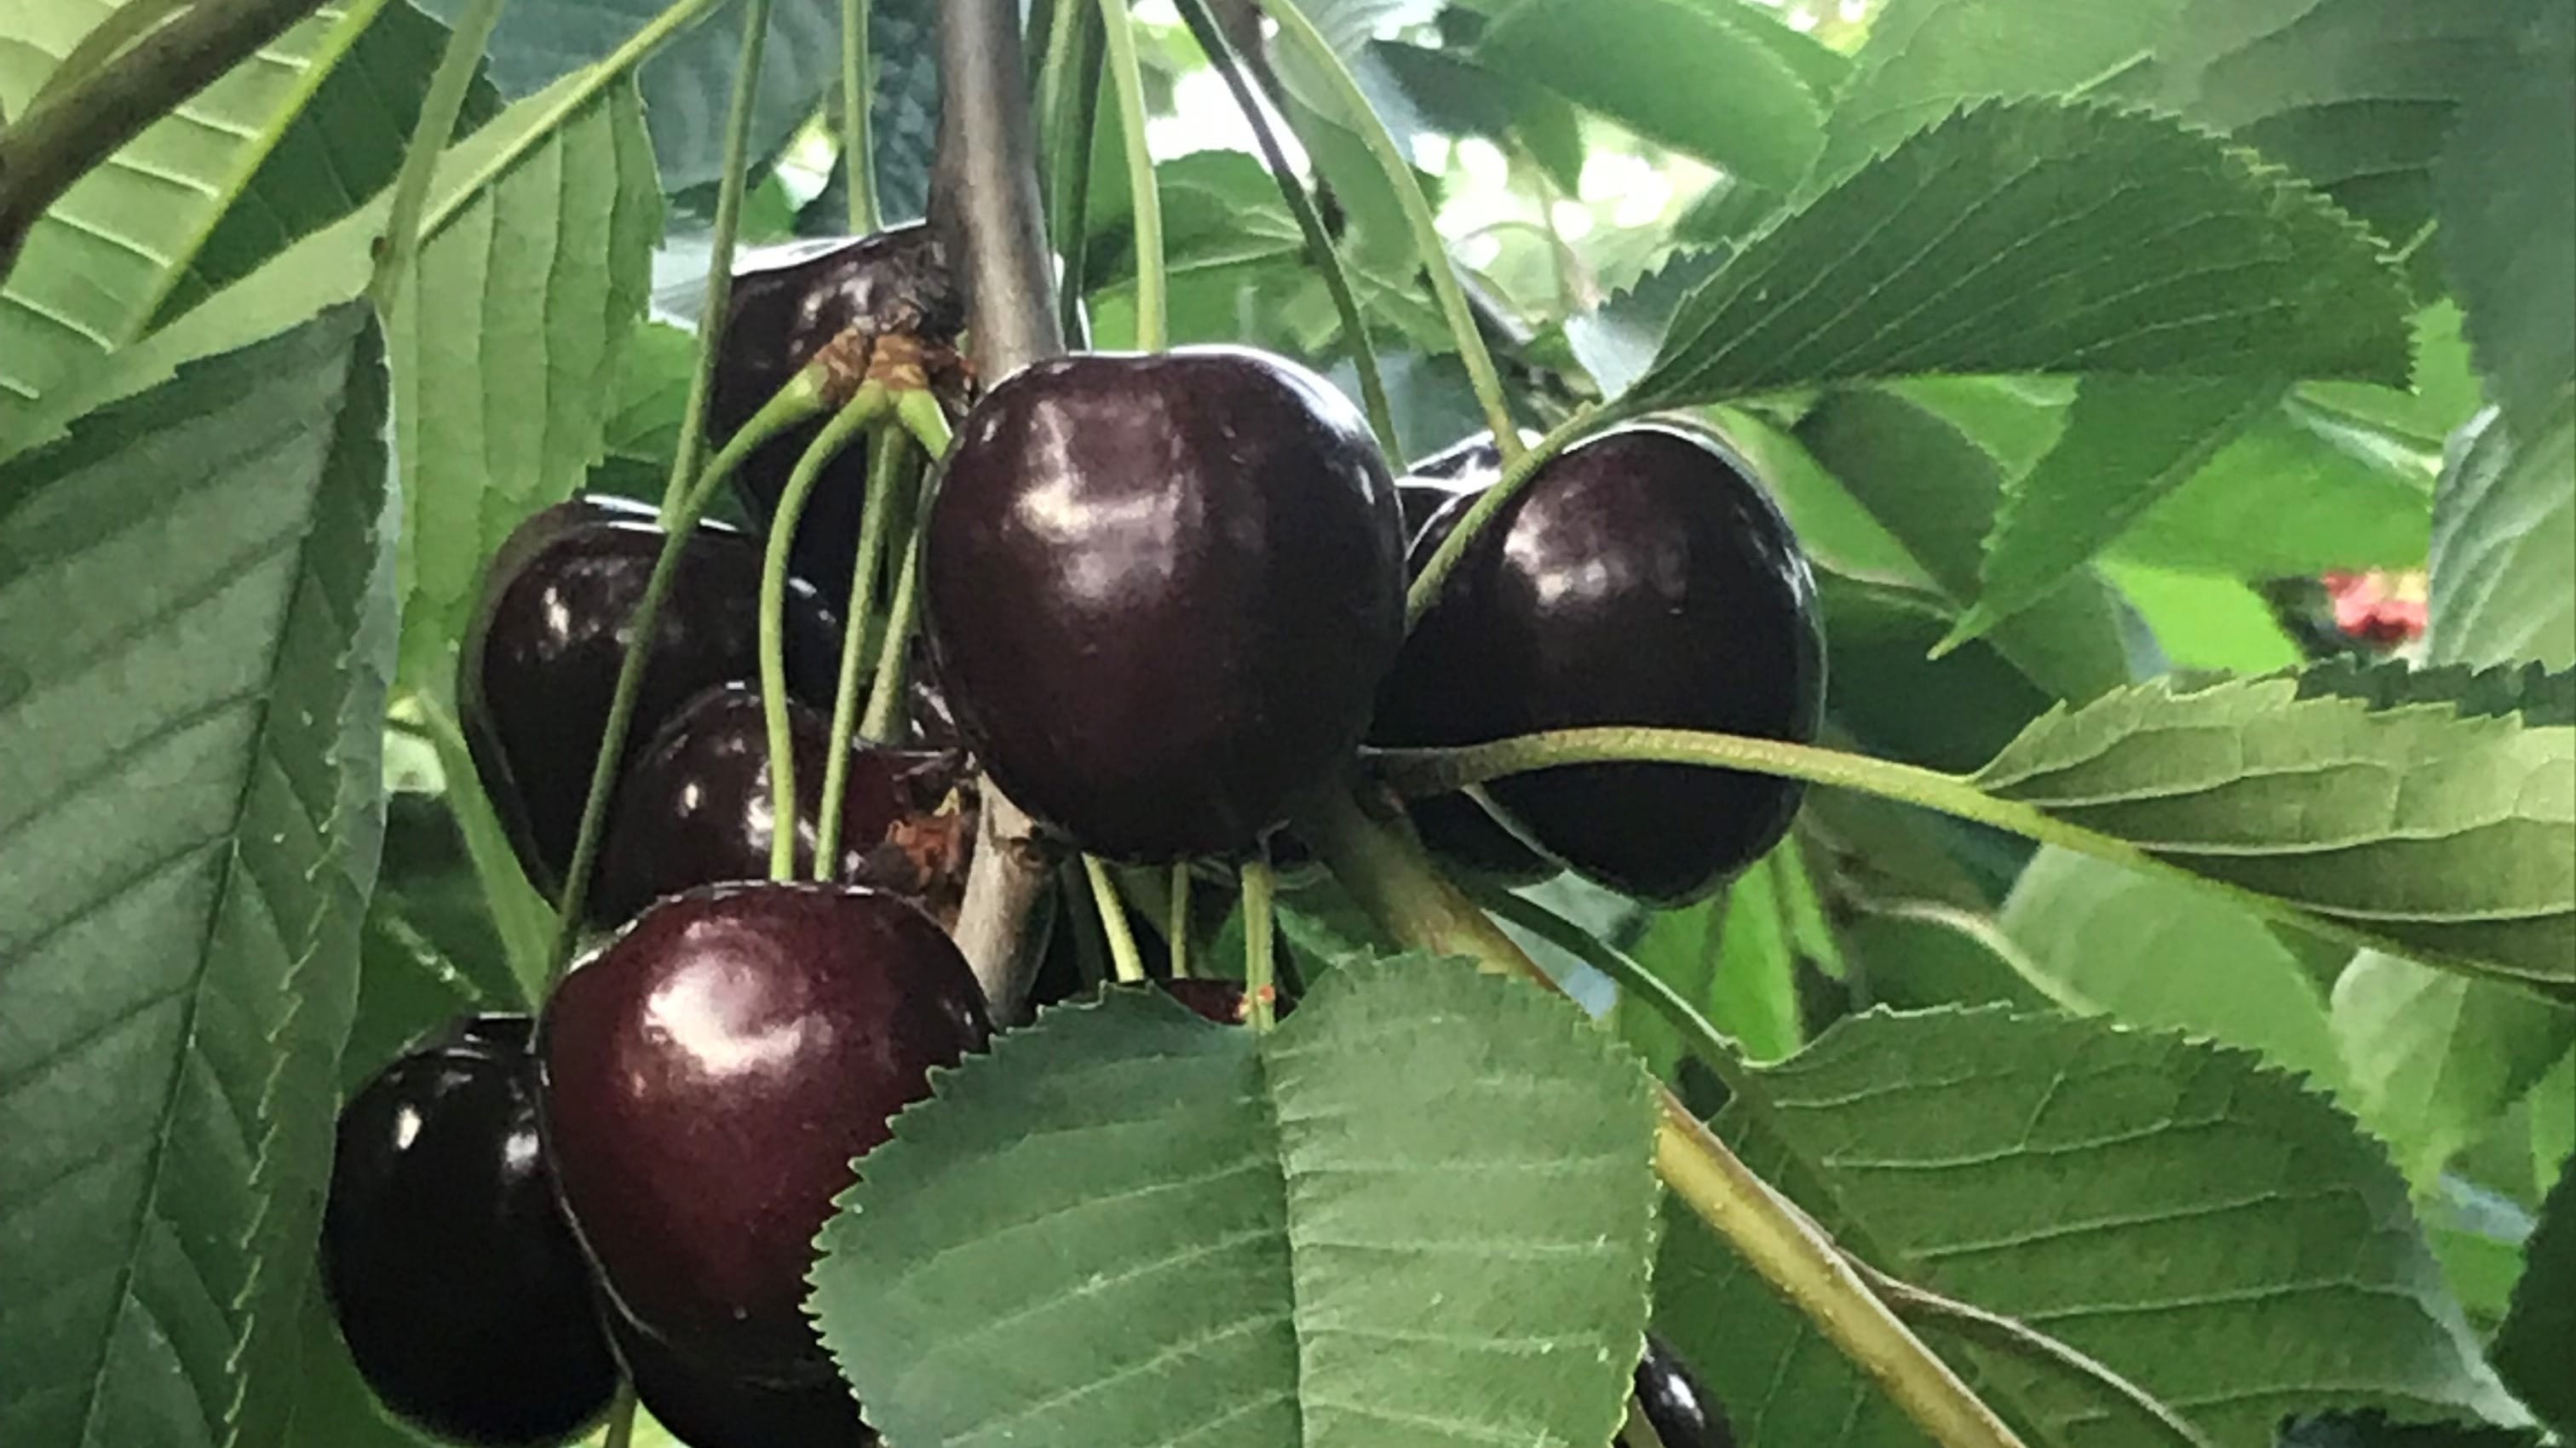 We as tree nursery are particularly proud of our large sized cherry varieties